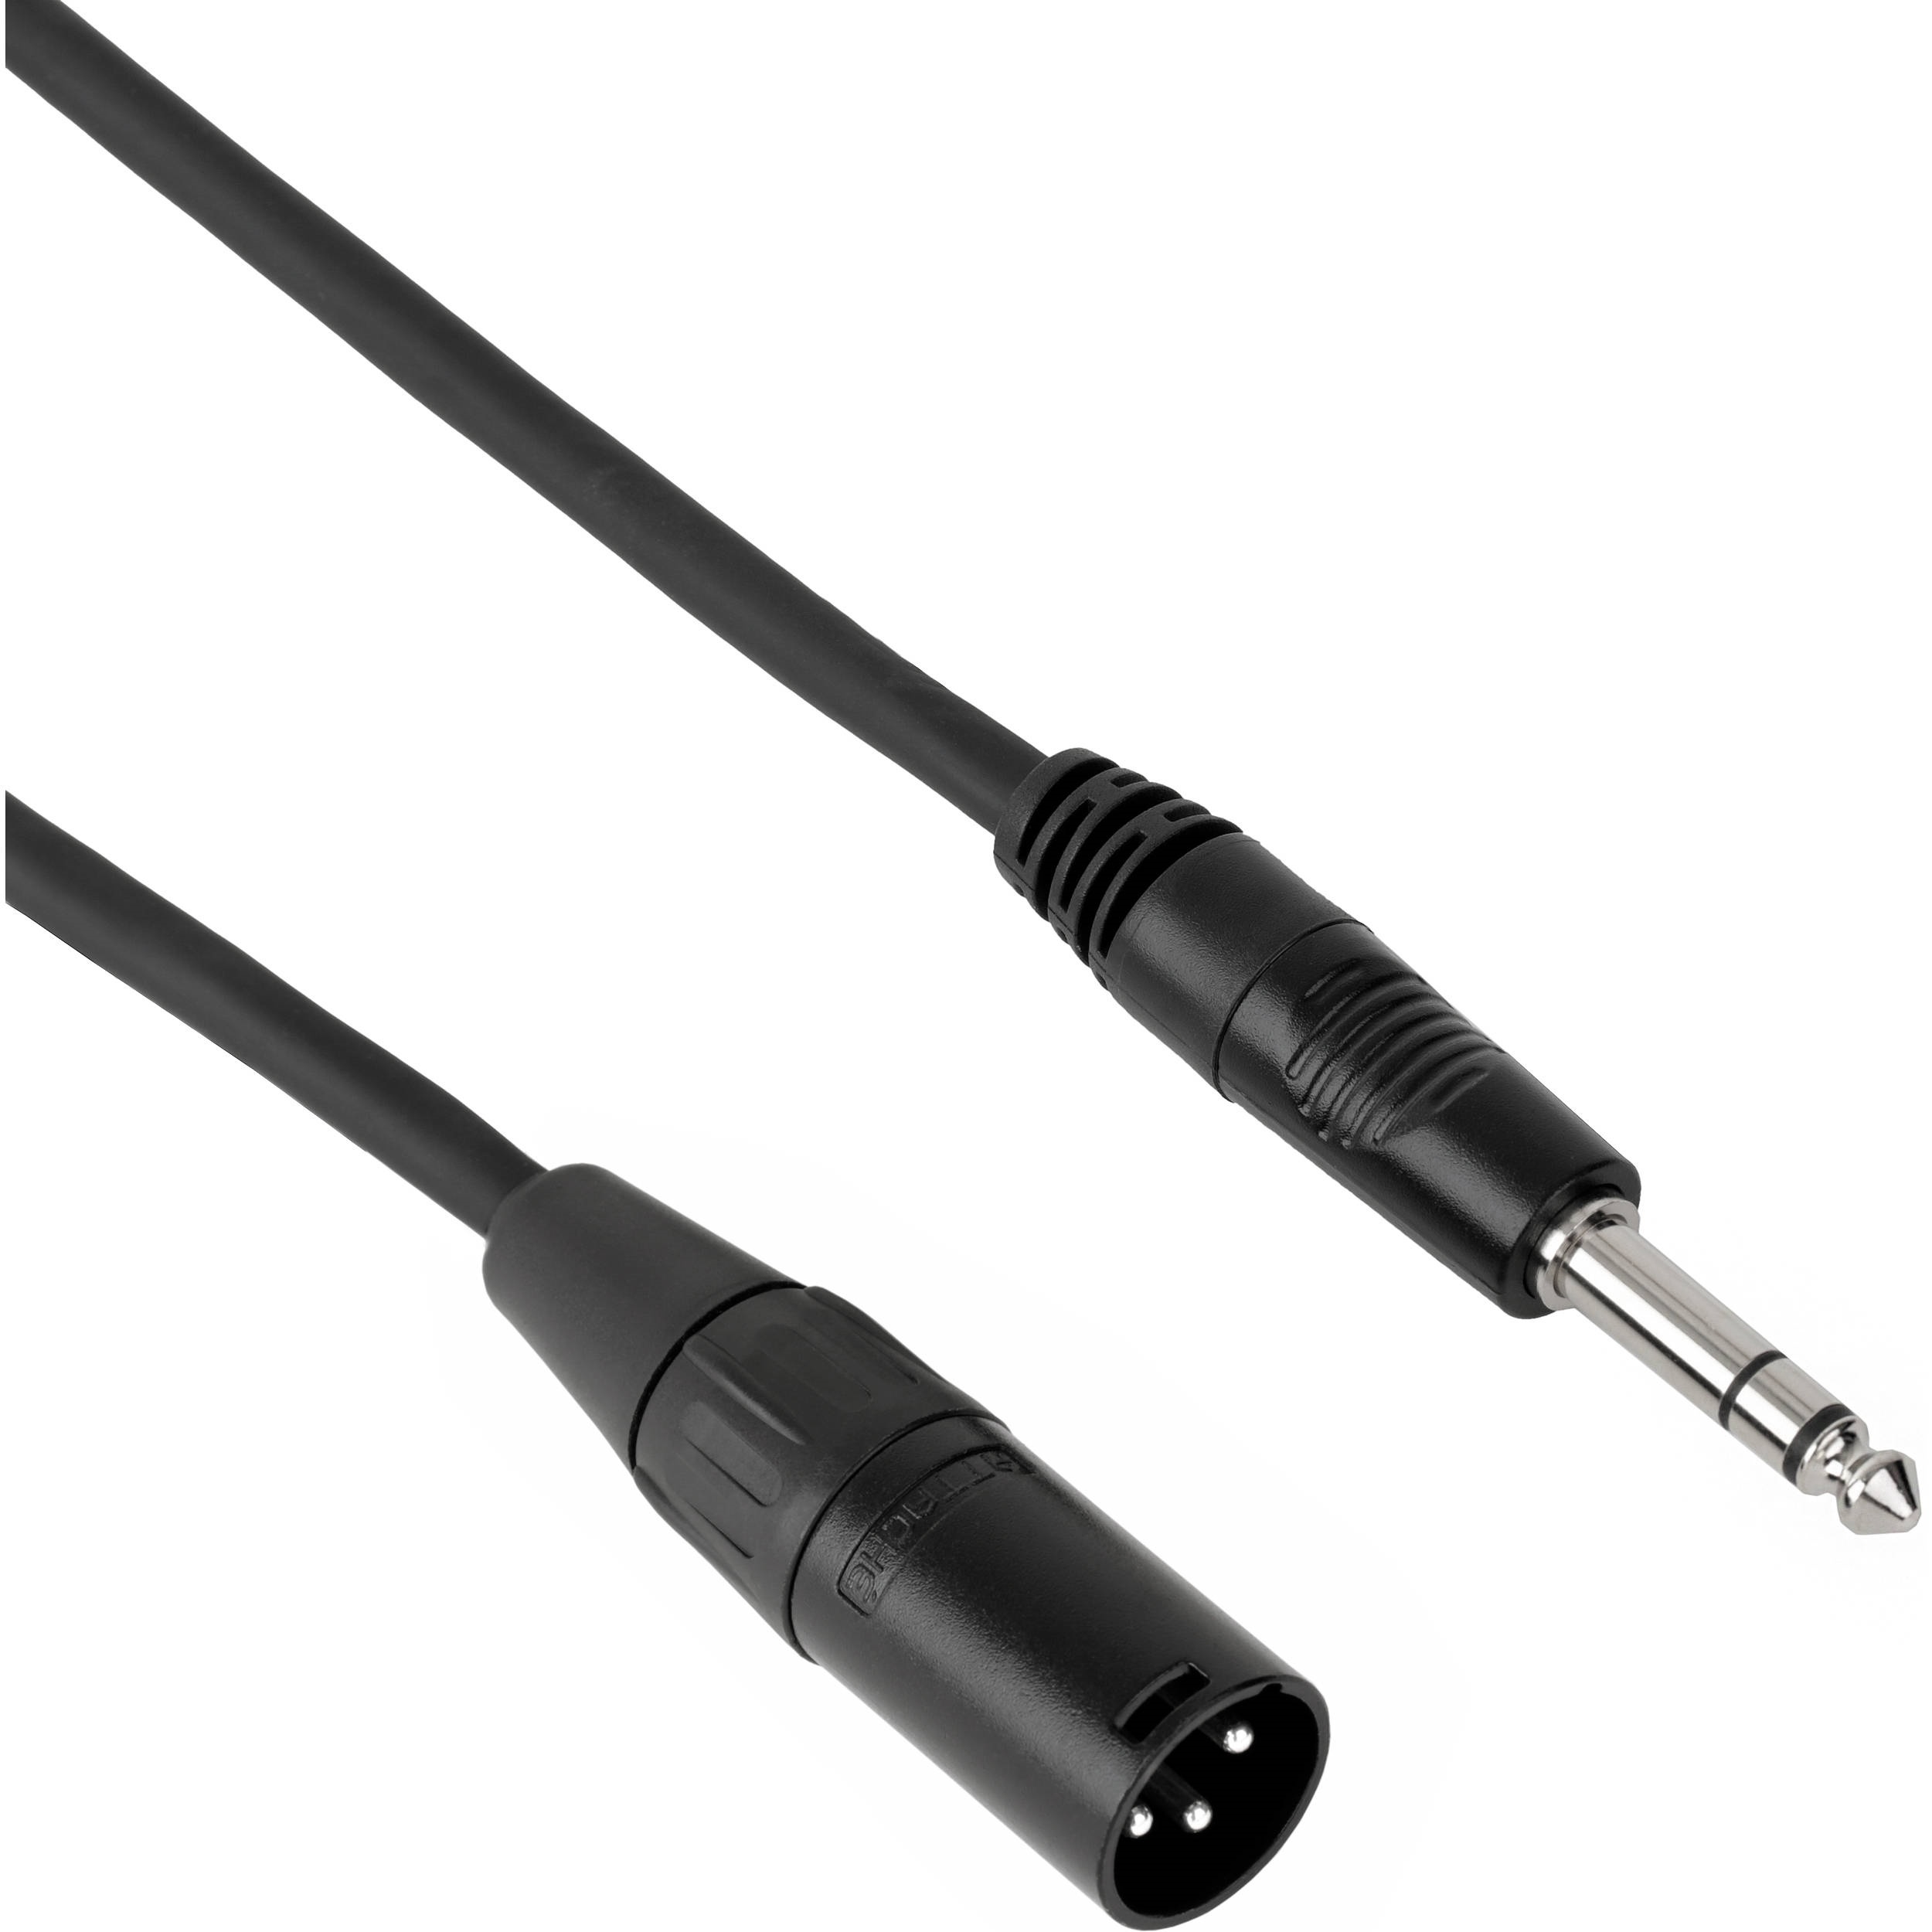 Pearstone PM Series 1/4" TRS M to XLR M Professional Interconnect Cable - 3' (0.91 m)